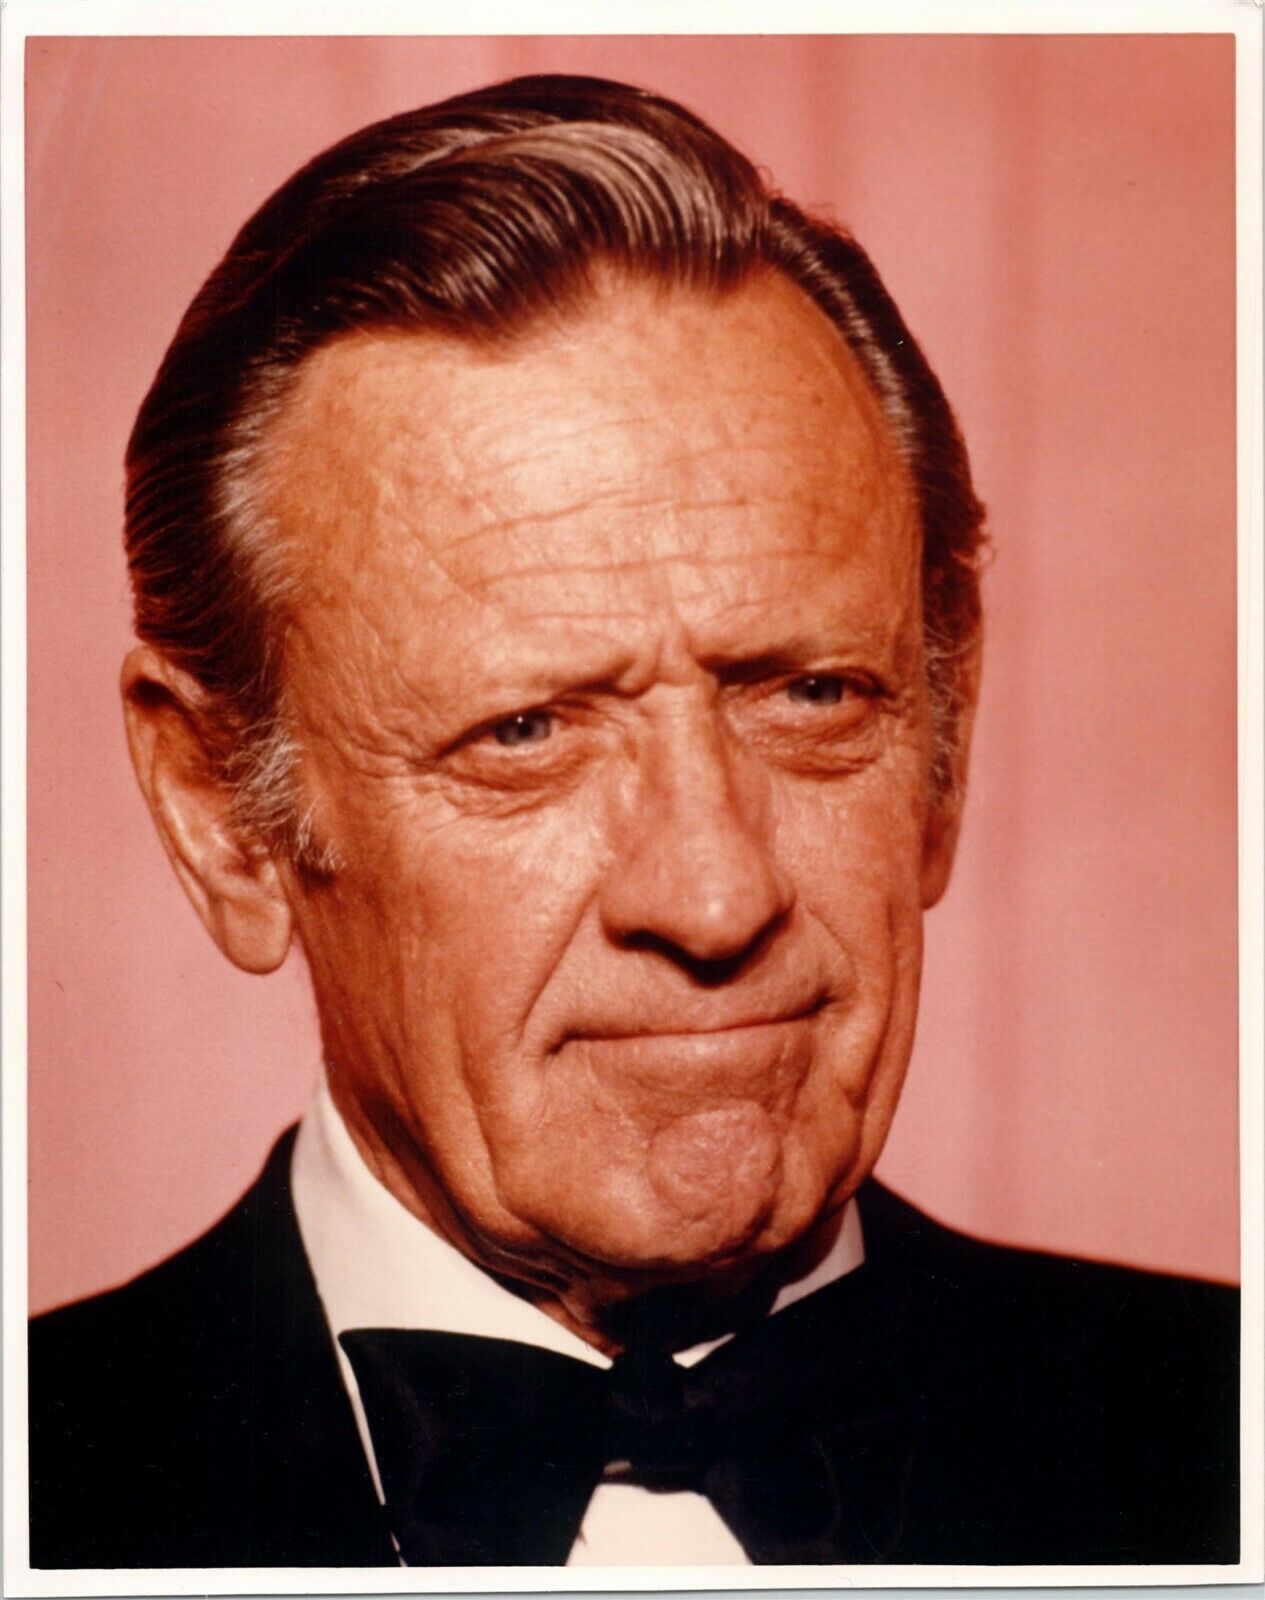 Primary image for William Holden vintage 1970's press photo in tuxedo smiling 8x10 photo